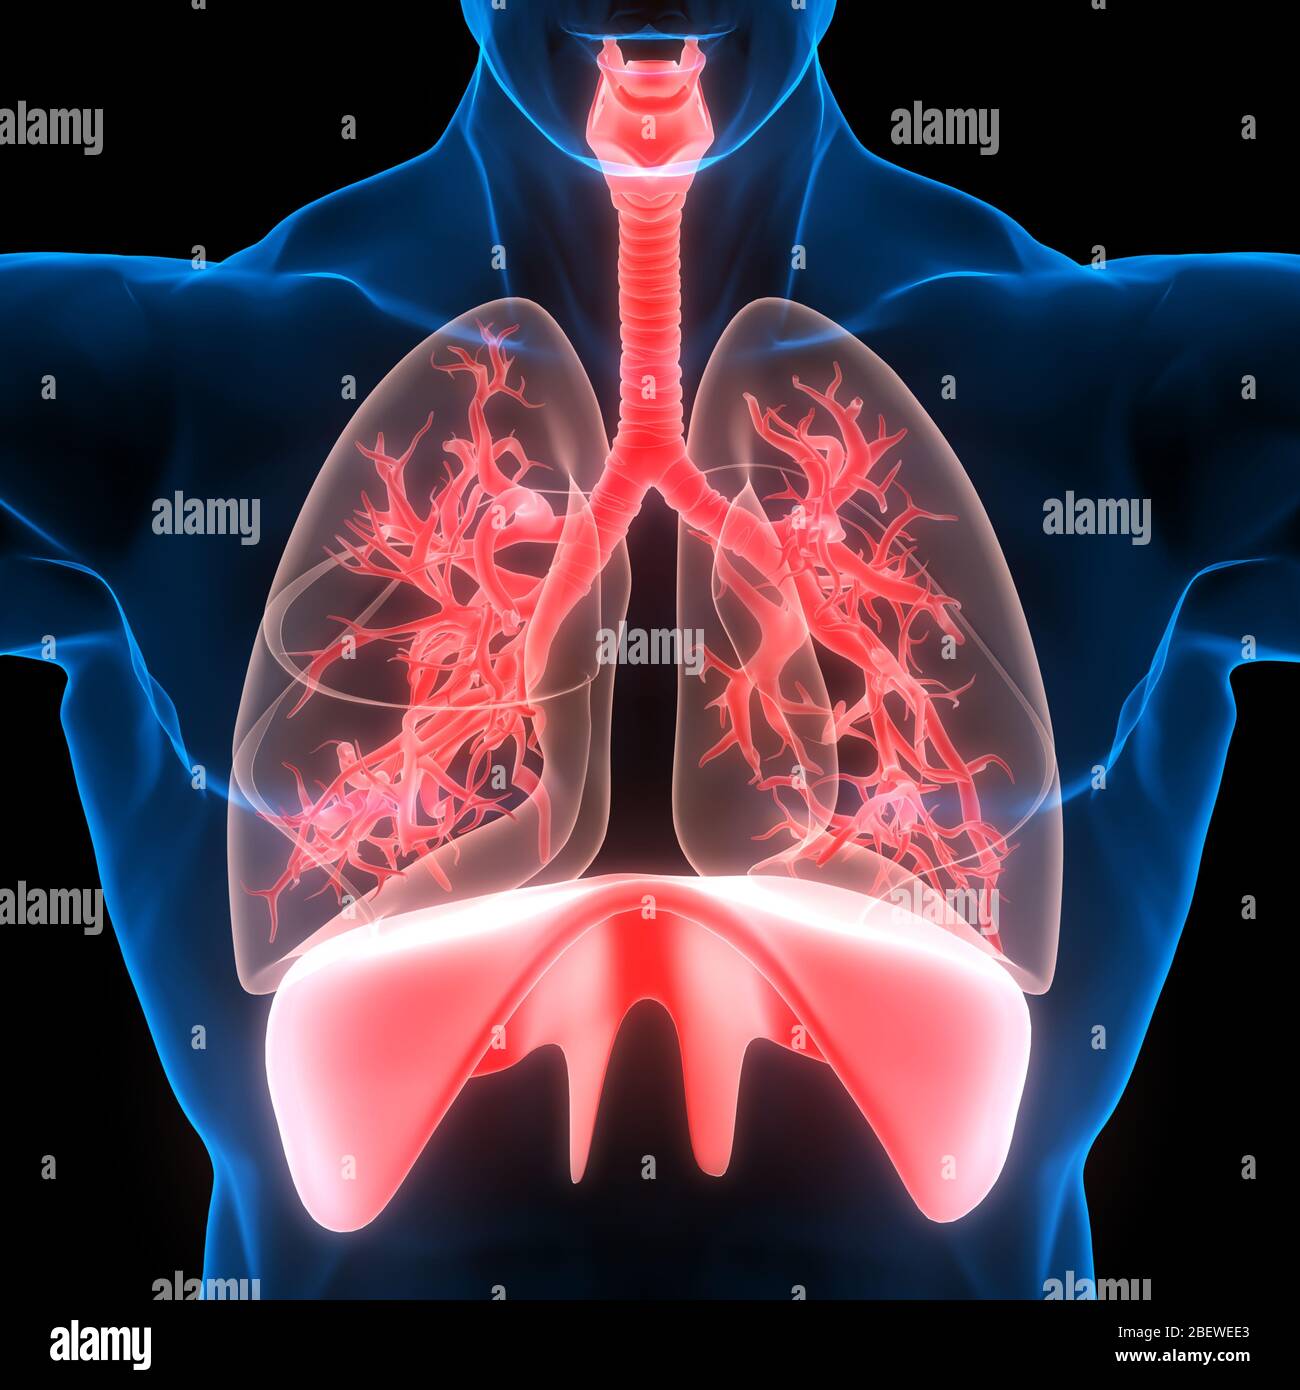 Human Respiratory System Lungs with Diaphragm Anatomy Stock Photo